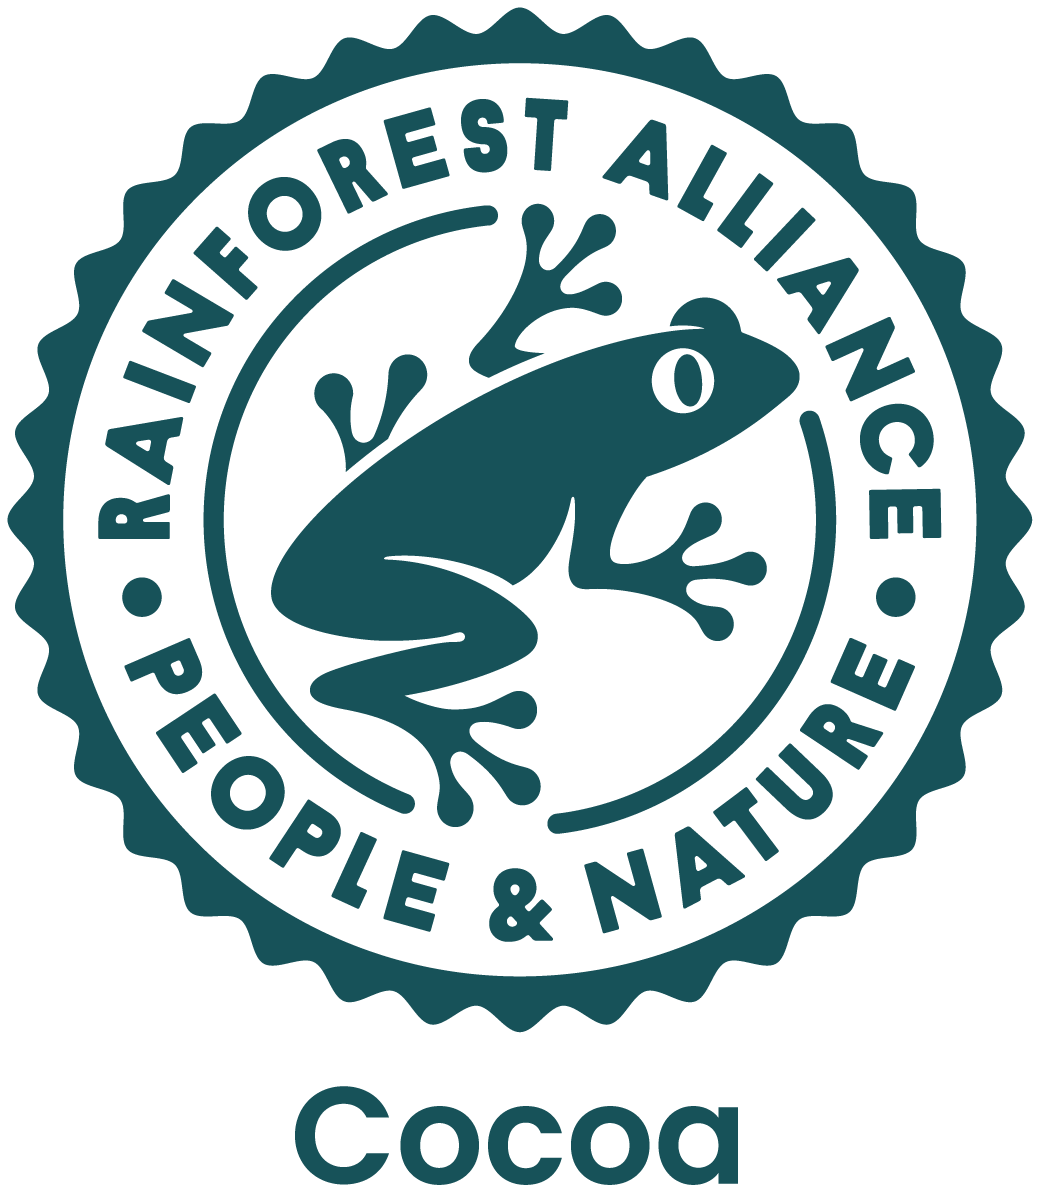 Rainforest Alliance Seal_Core Green and White-RGB_Cocoa_ENG.png